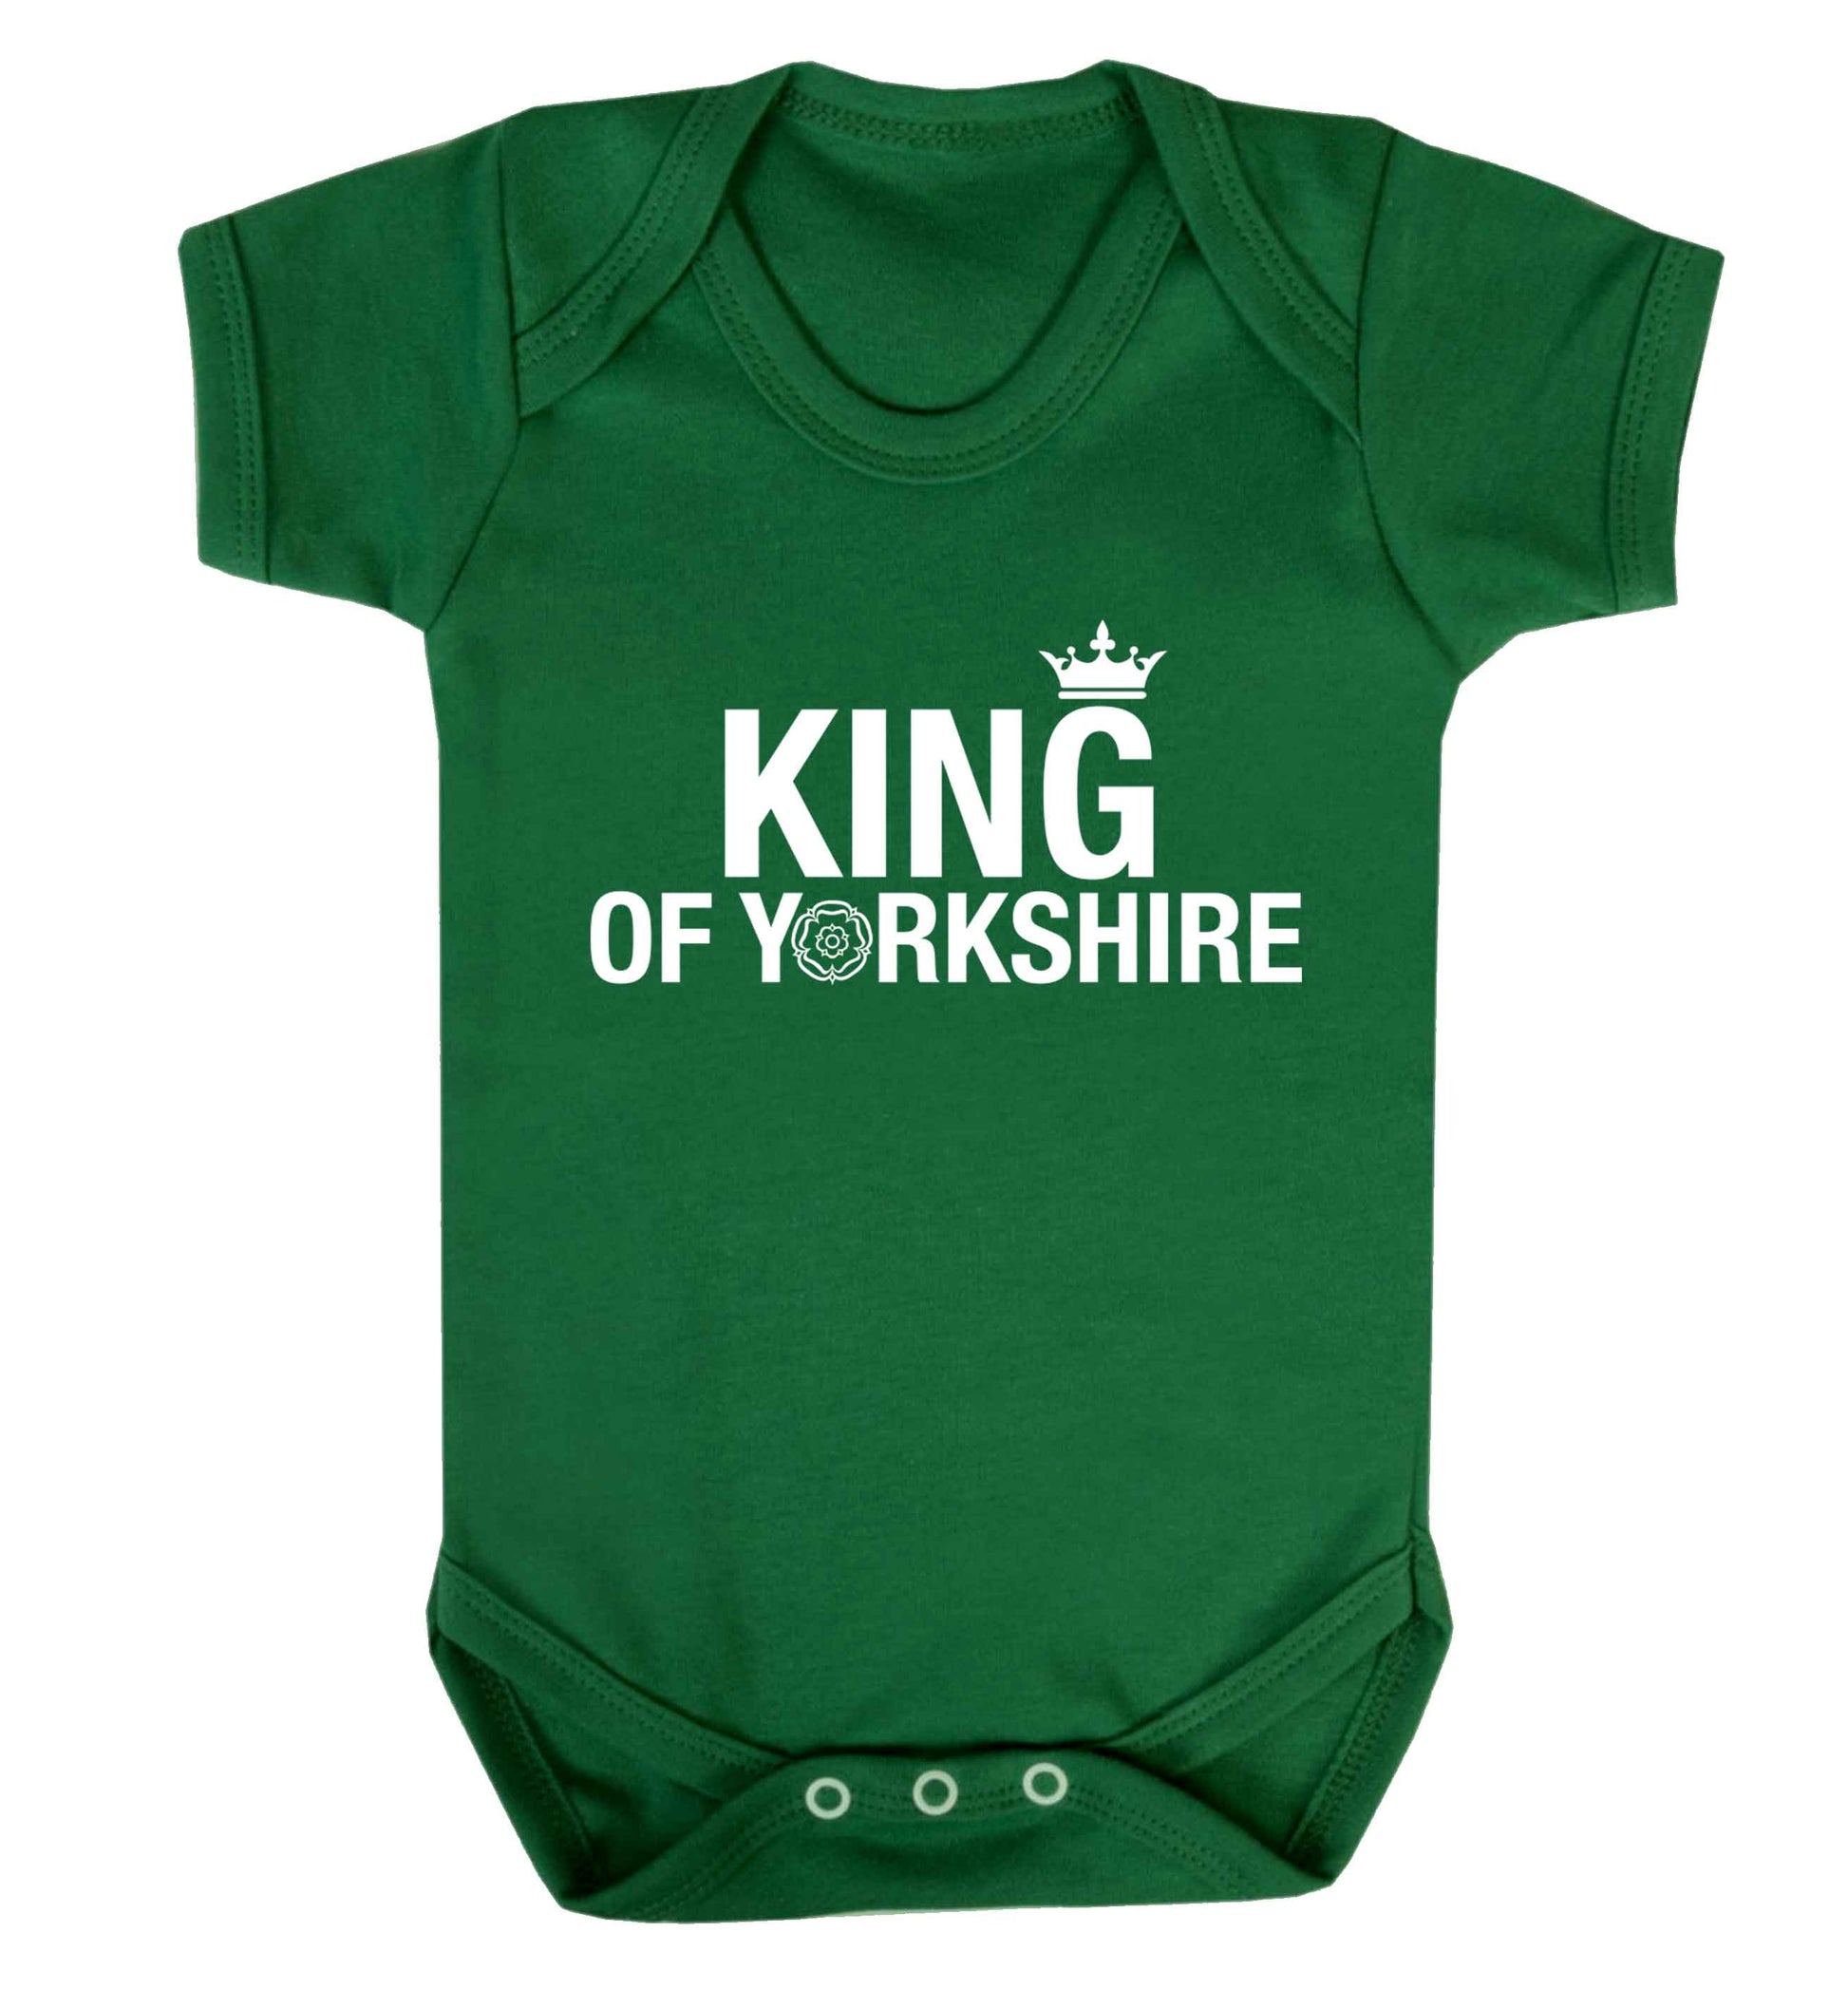 King of Yorkshire Baby Vest green 18-24 months